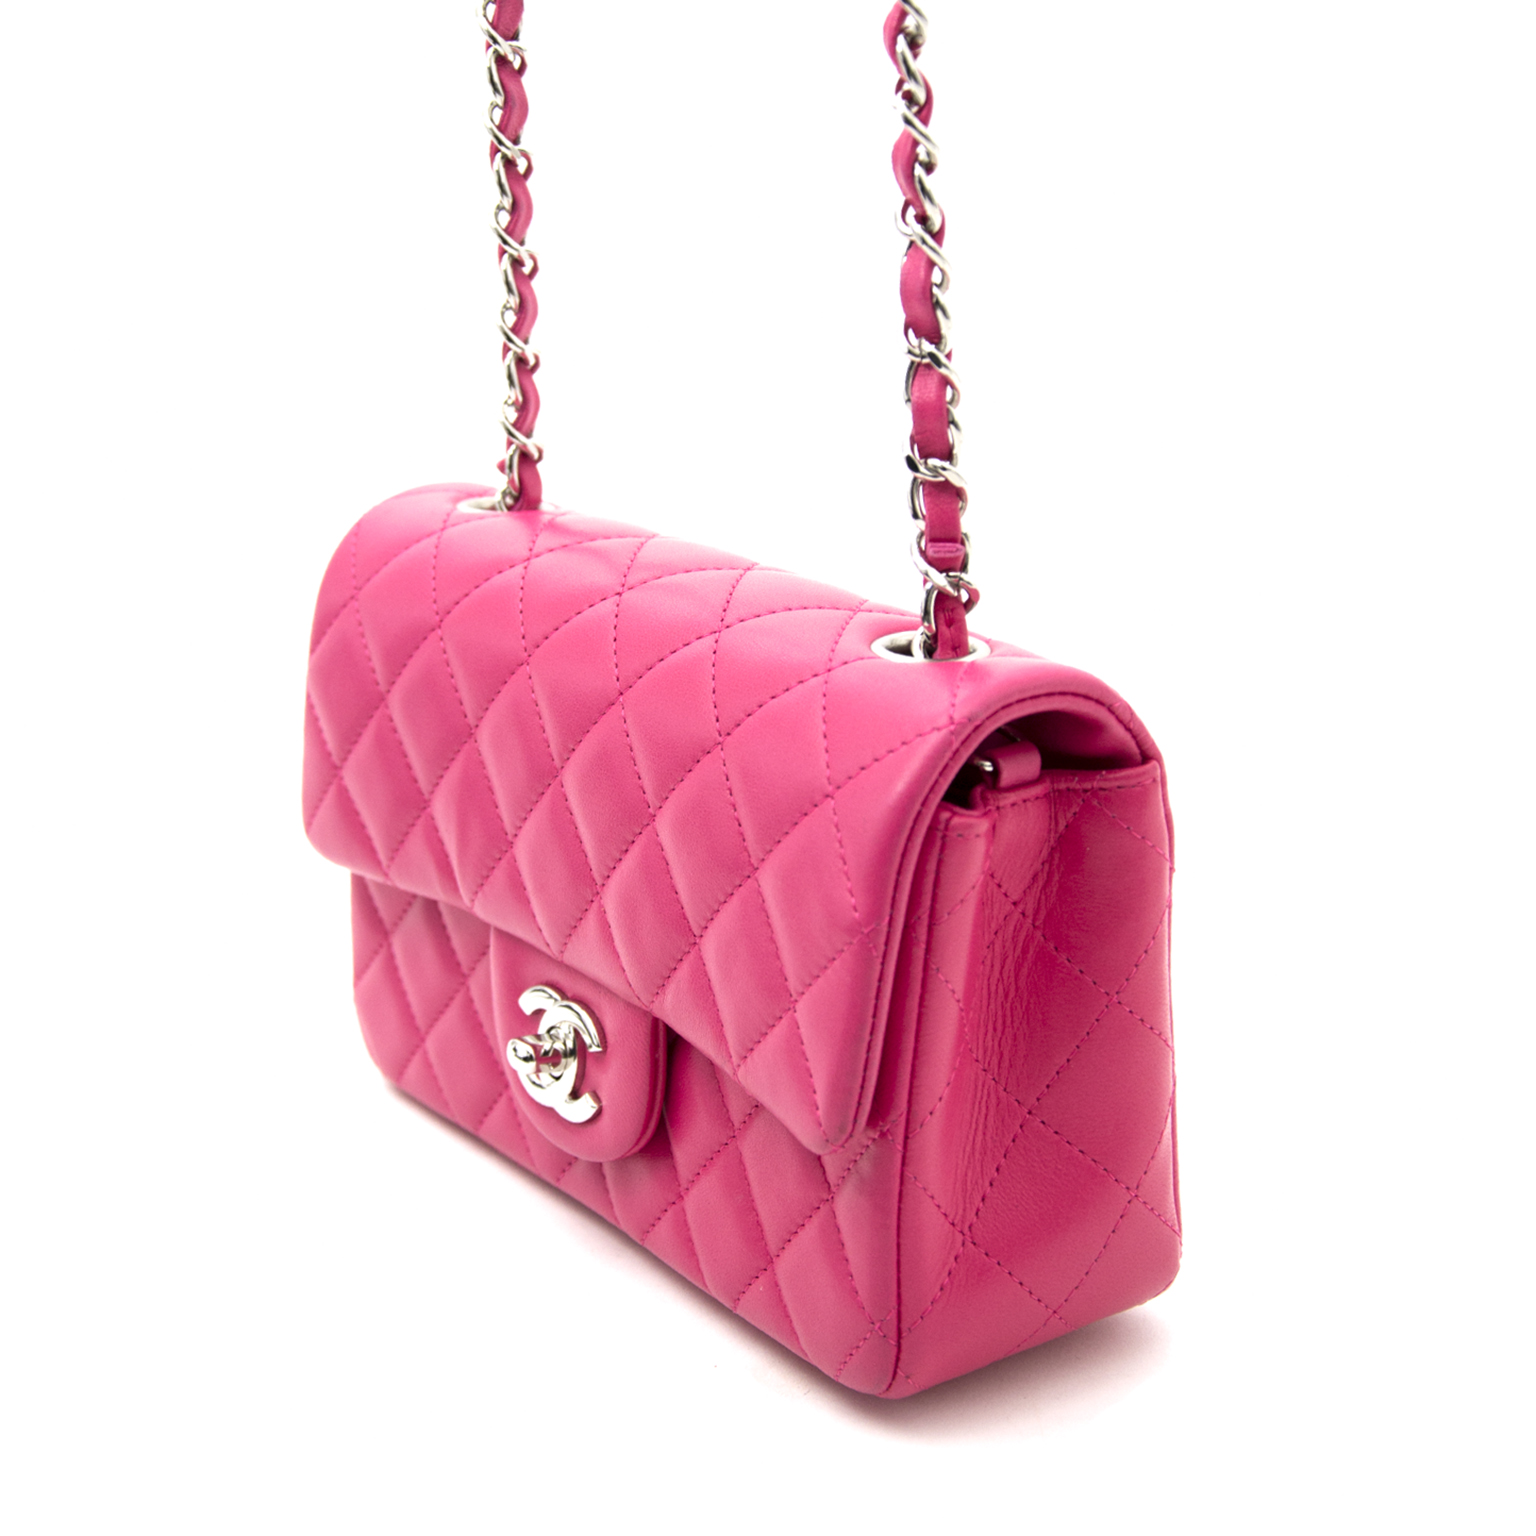 Sotheby's Specialists Picks: Pink Chanel Bag, Handbags and Accessories